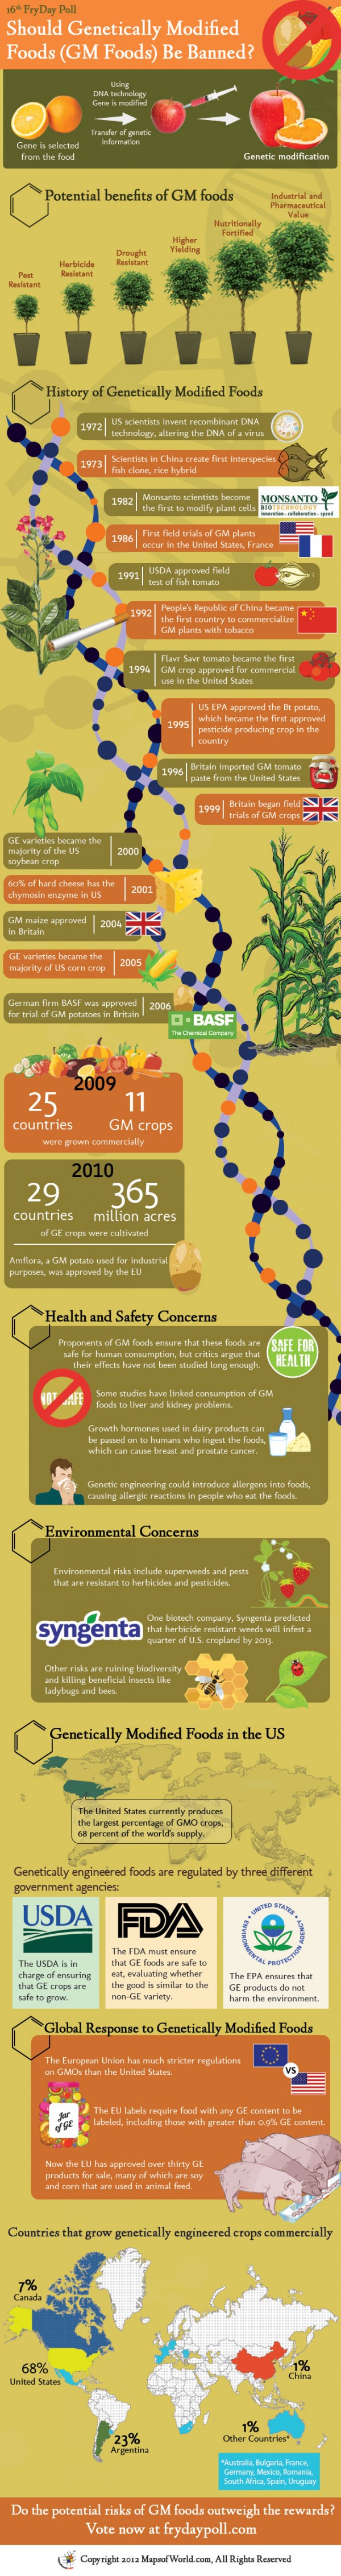 What do you know about GMOs